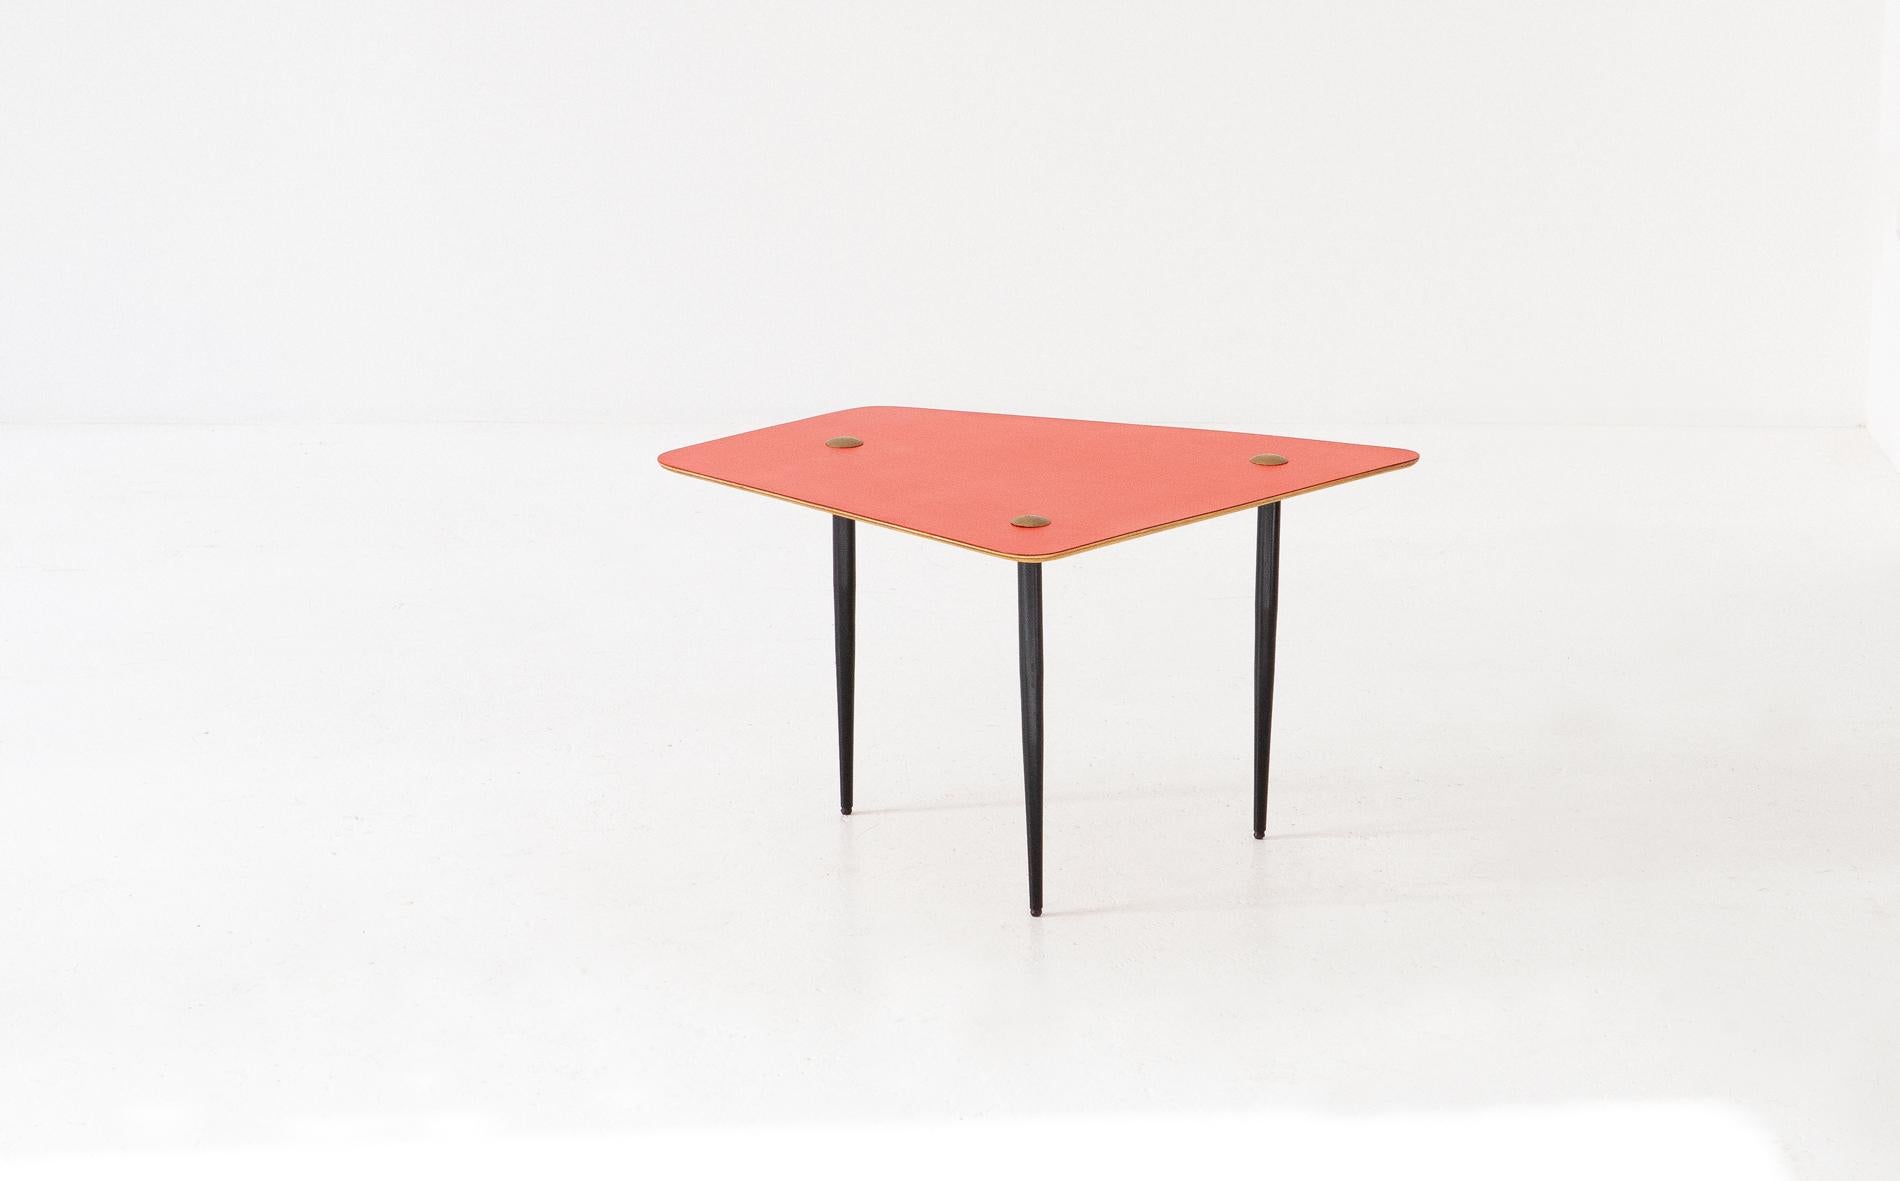 Mid-20th Century Italian Mid-Century Modern Soft Red and Brass Coffee Table, 1950s